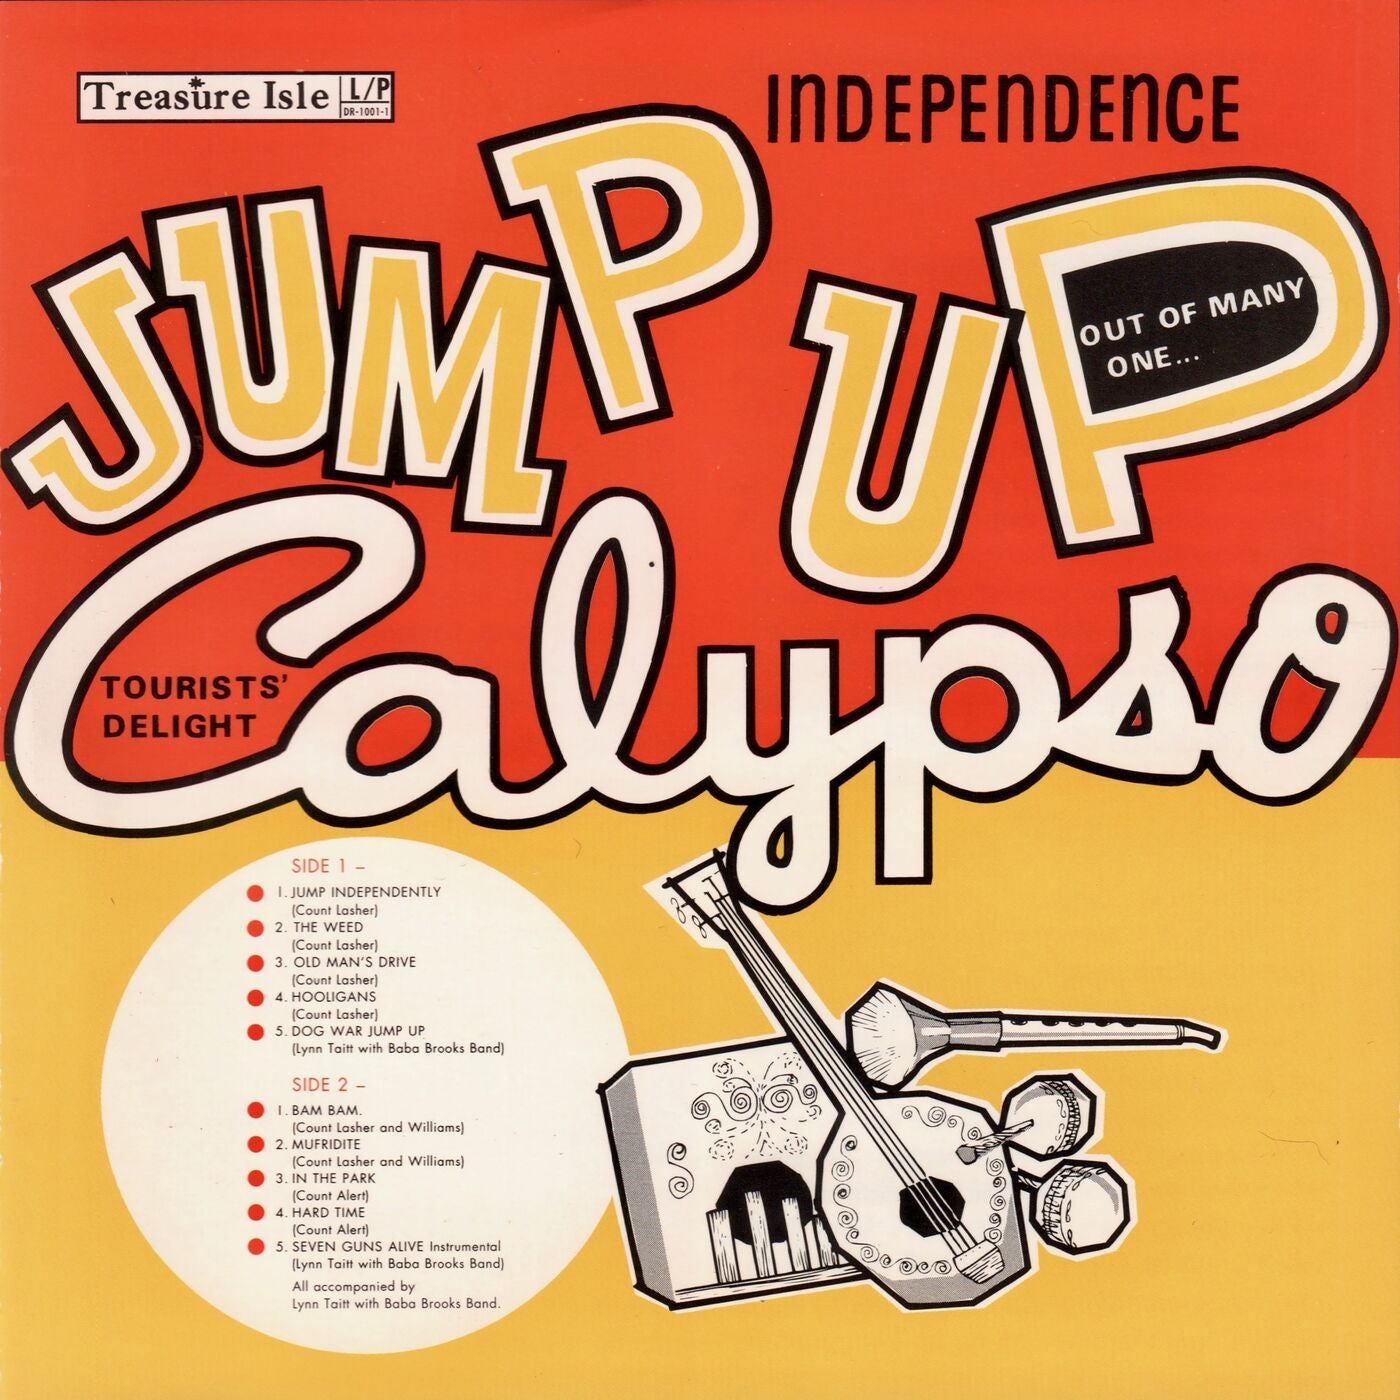 Independence Jump Up Calypso by Count Lasher, The Baba Brooks Band